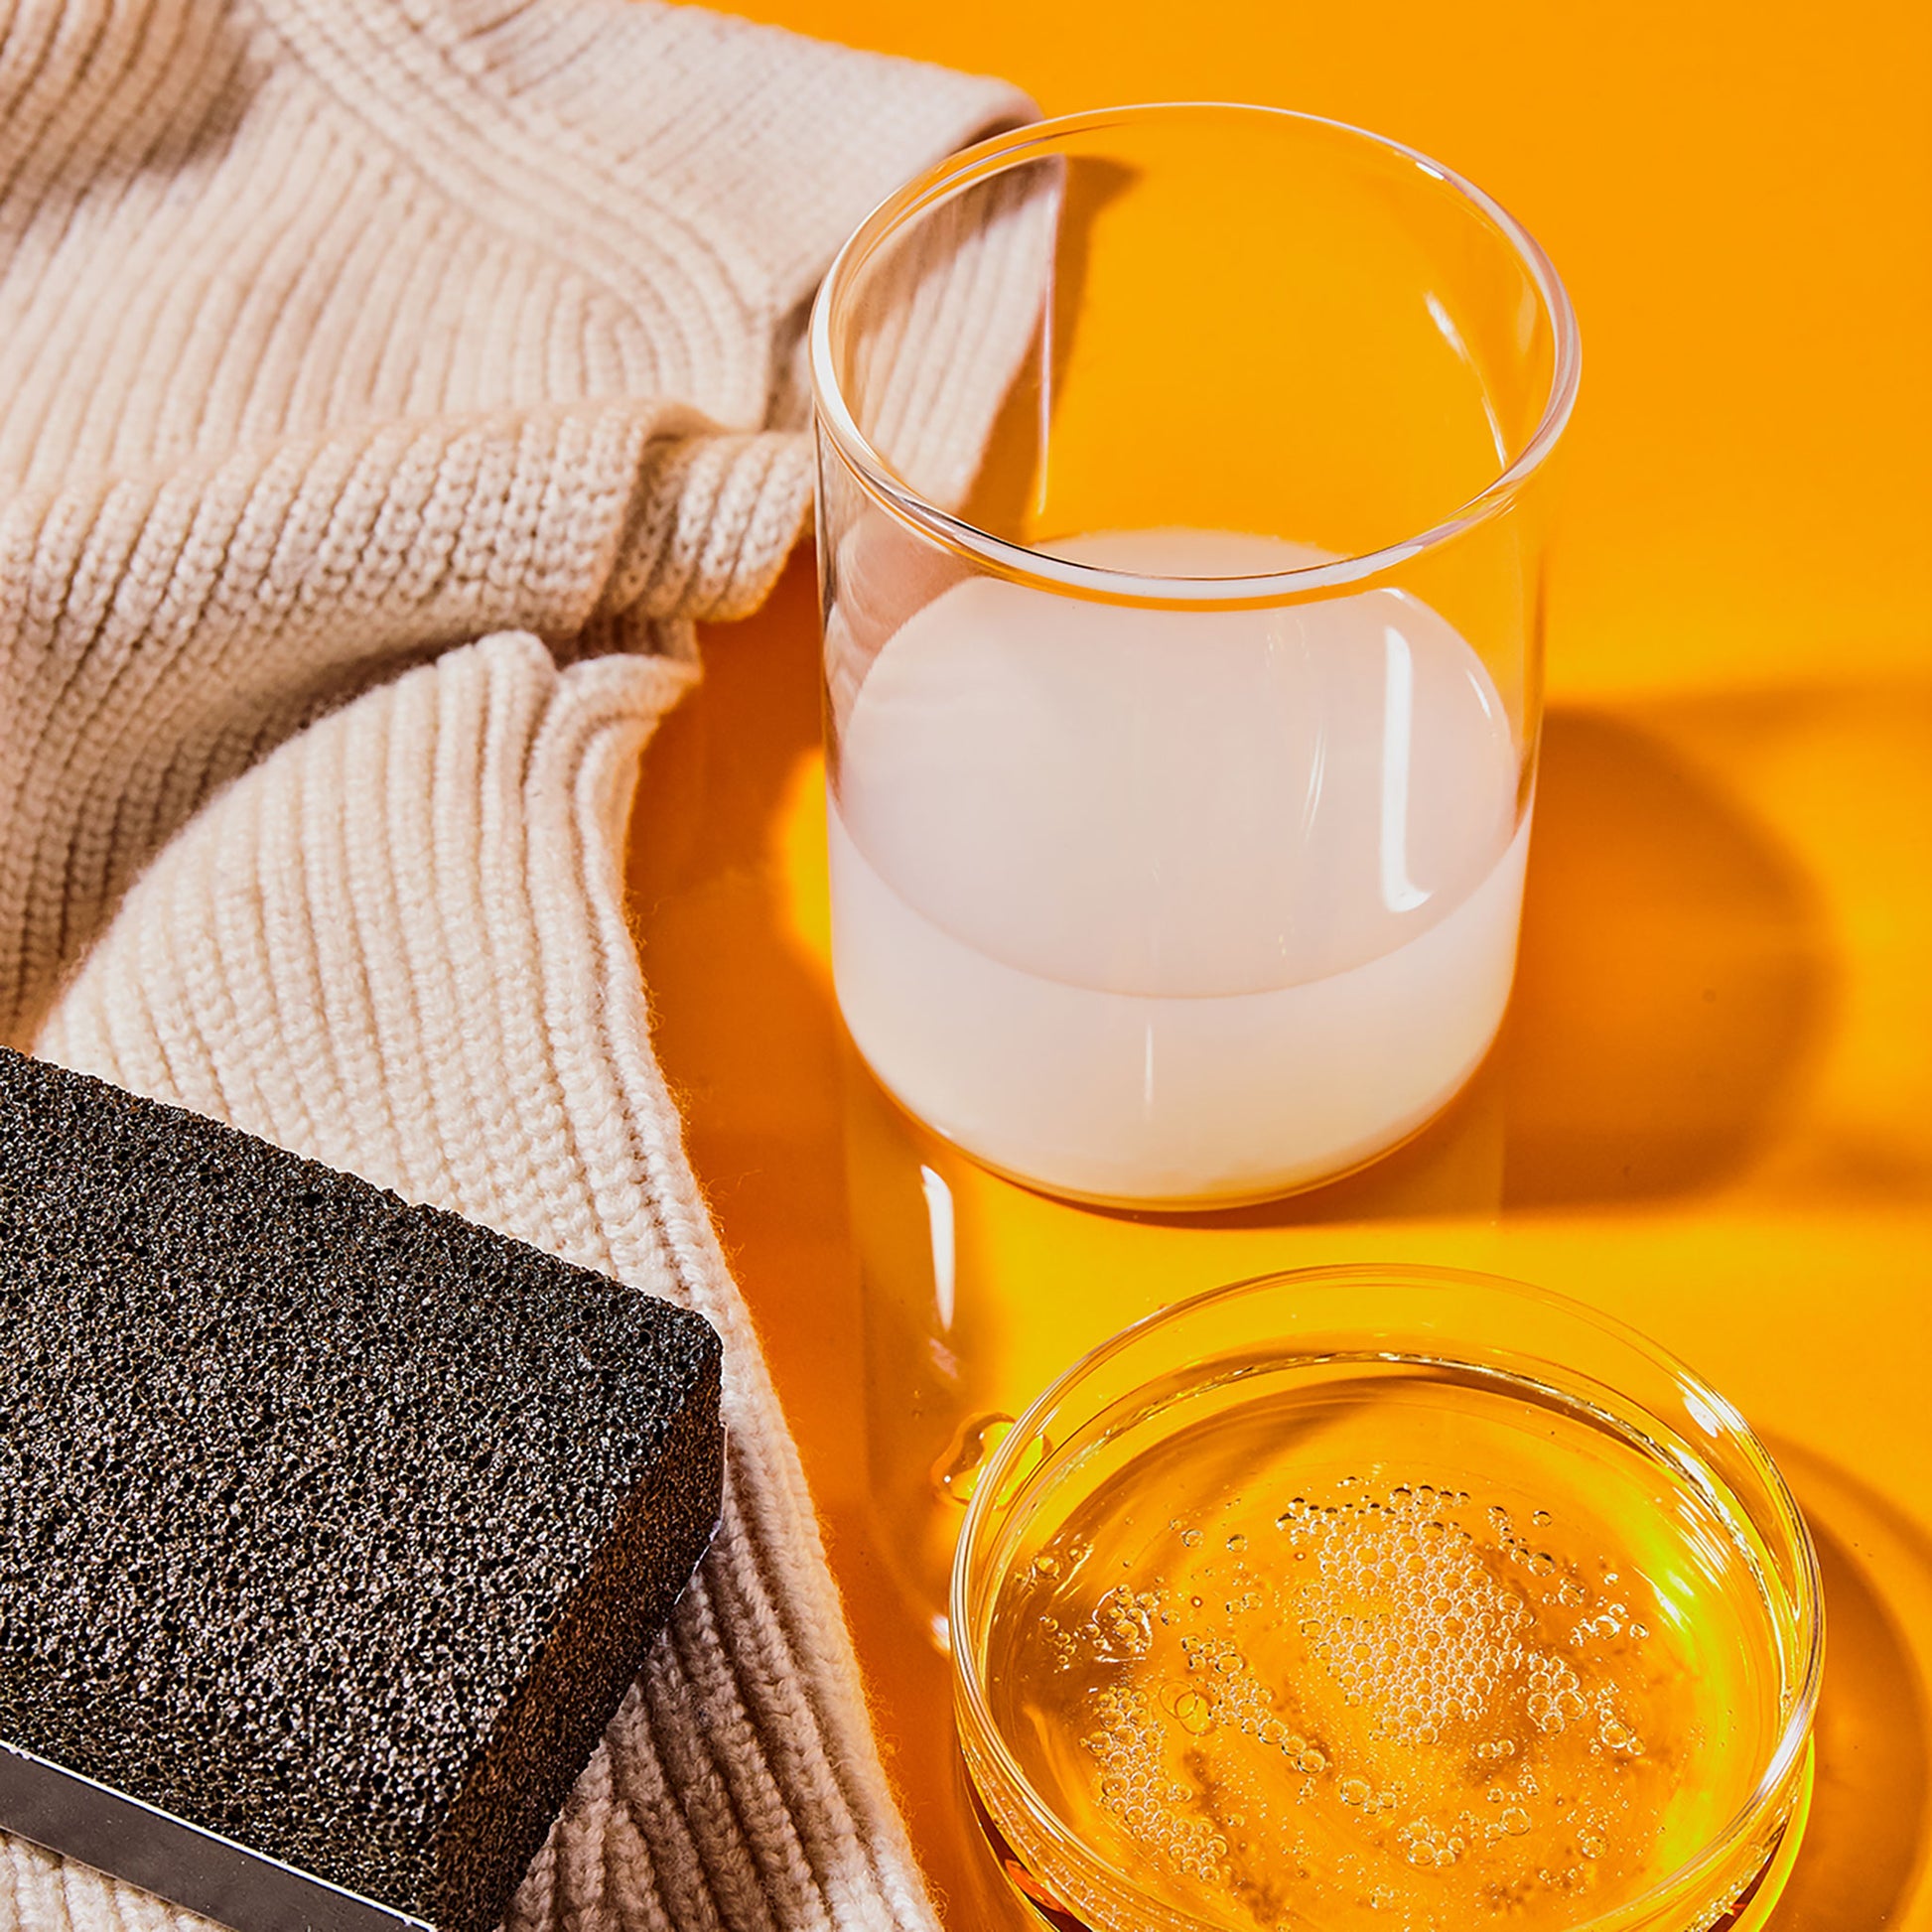 A black rectangular pill removing "stone" displayed with liquid detergent in a clear petri dish, wool conditioner in a clear glass, and a beige knitted sweater